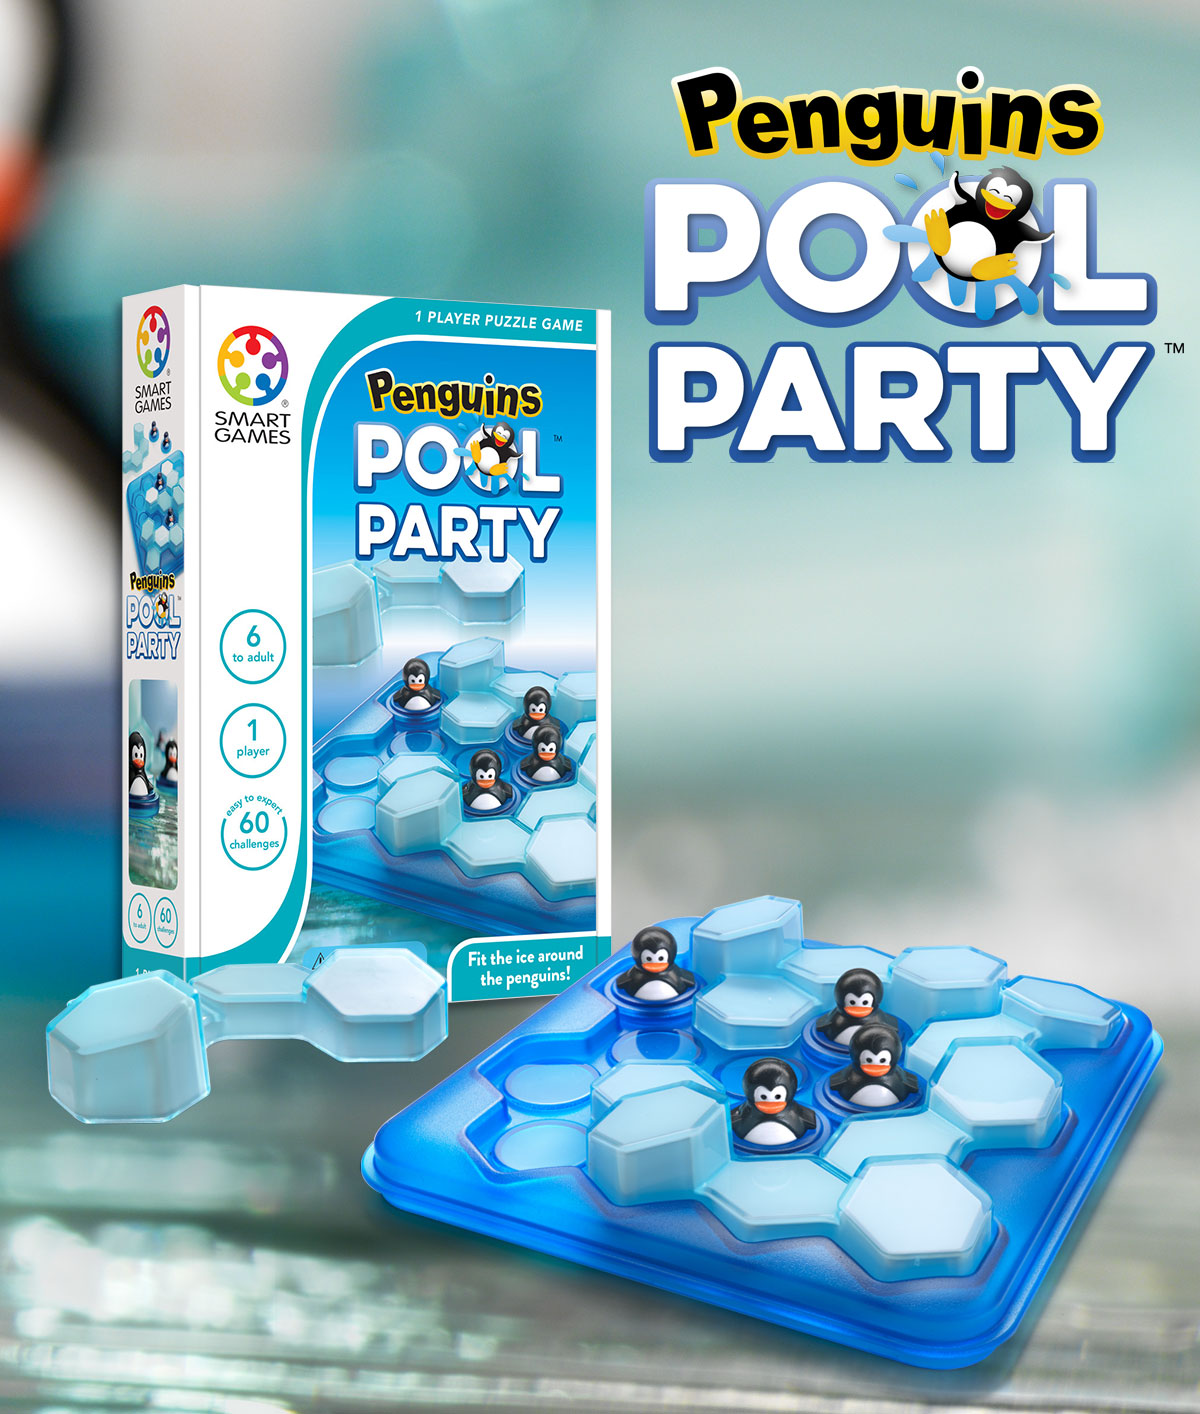 Penguins Pool Party Smart Games SG431 Compact/Travel 1 Player Puzzle Game 